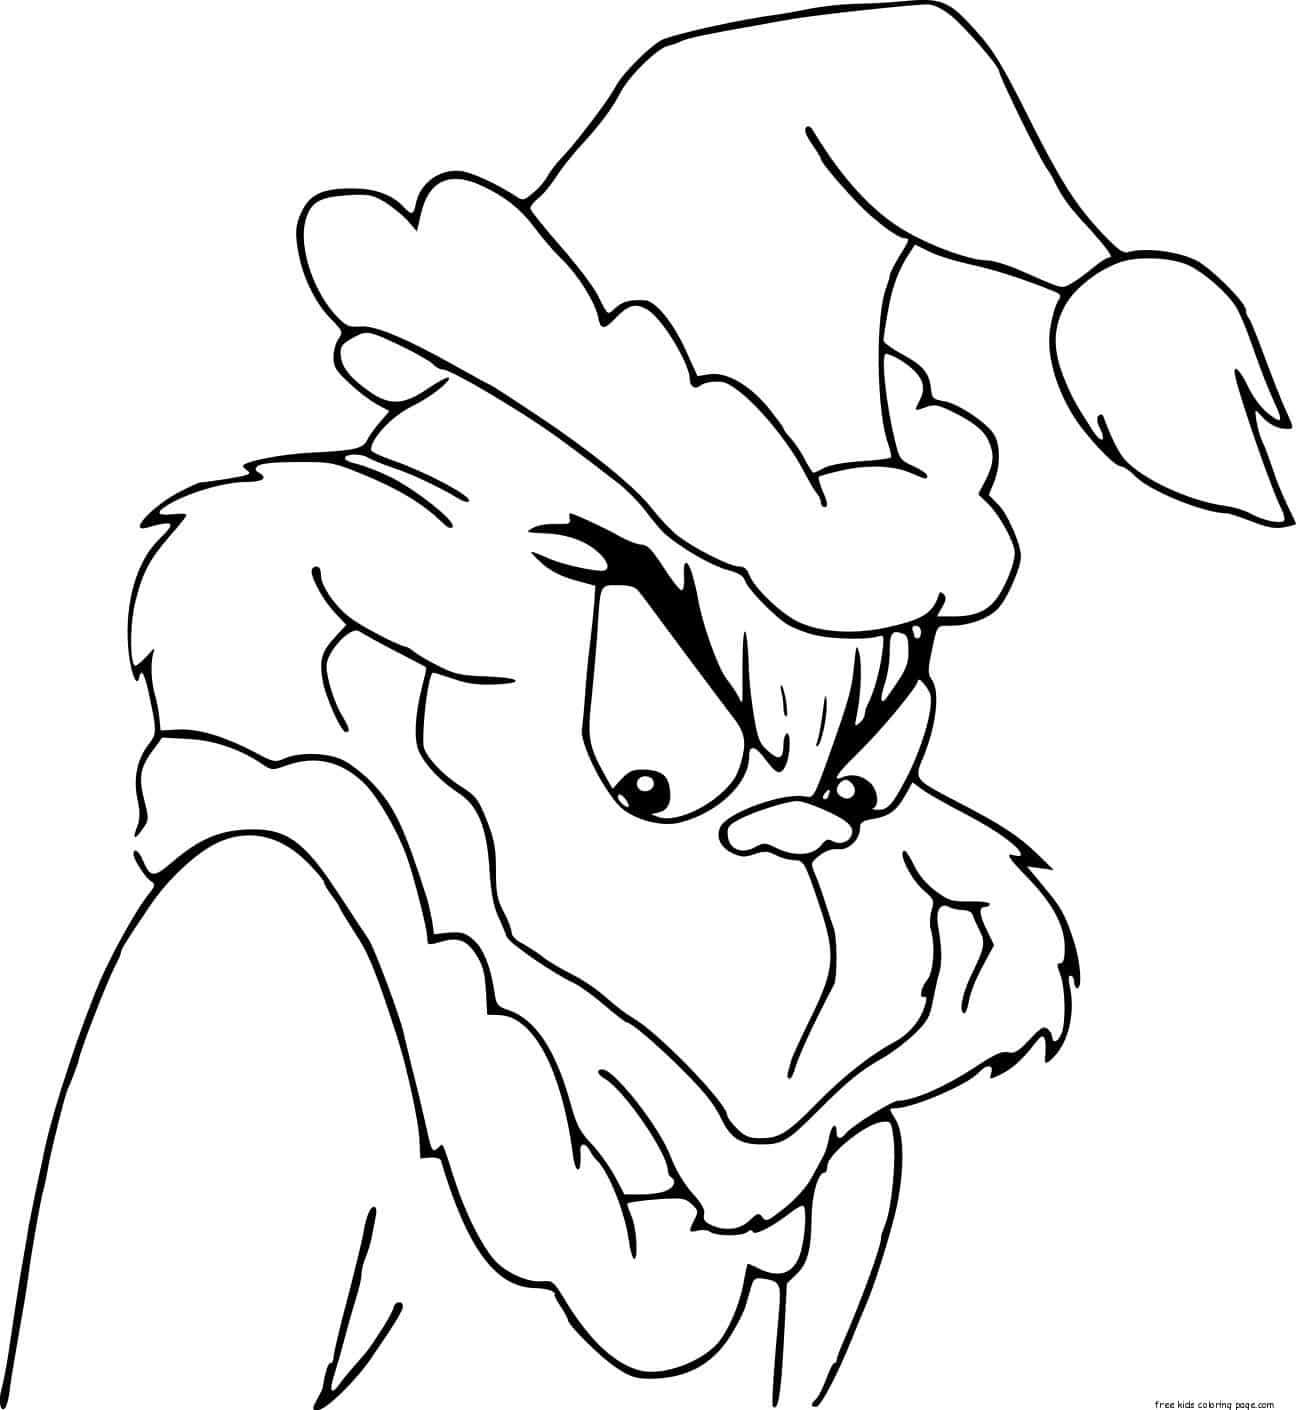 Grinch coloring page